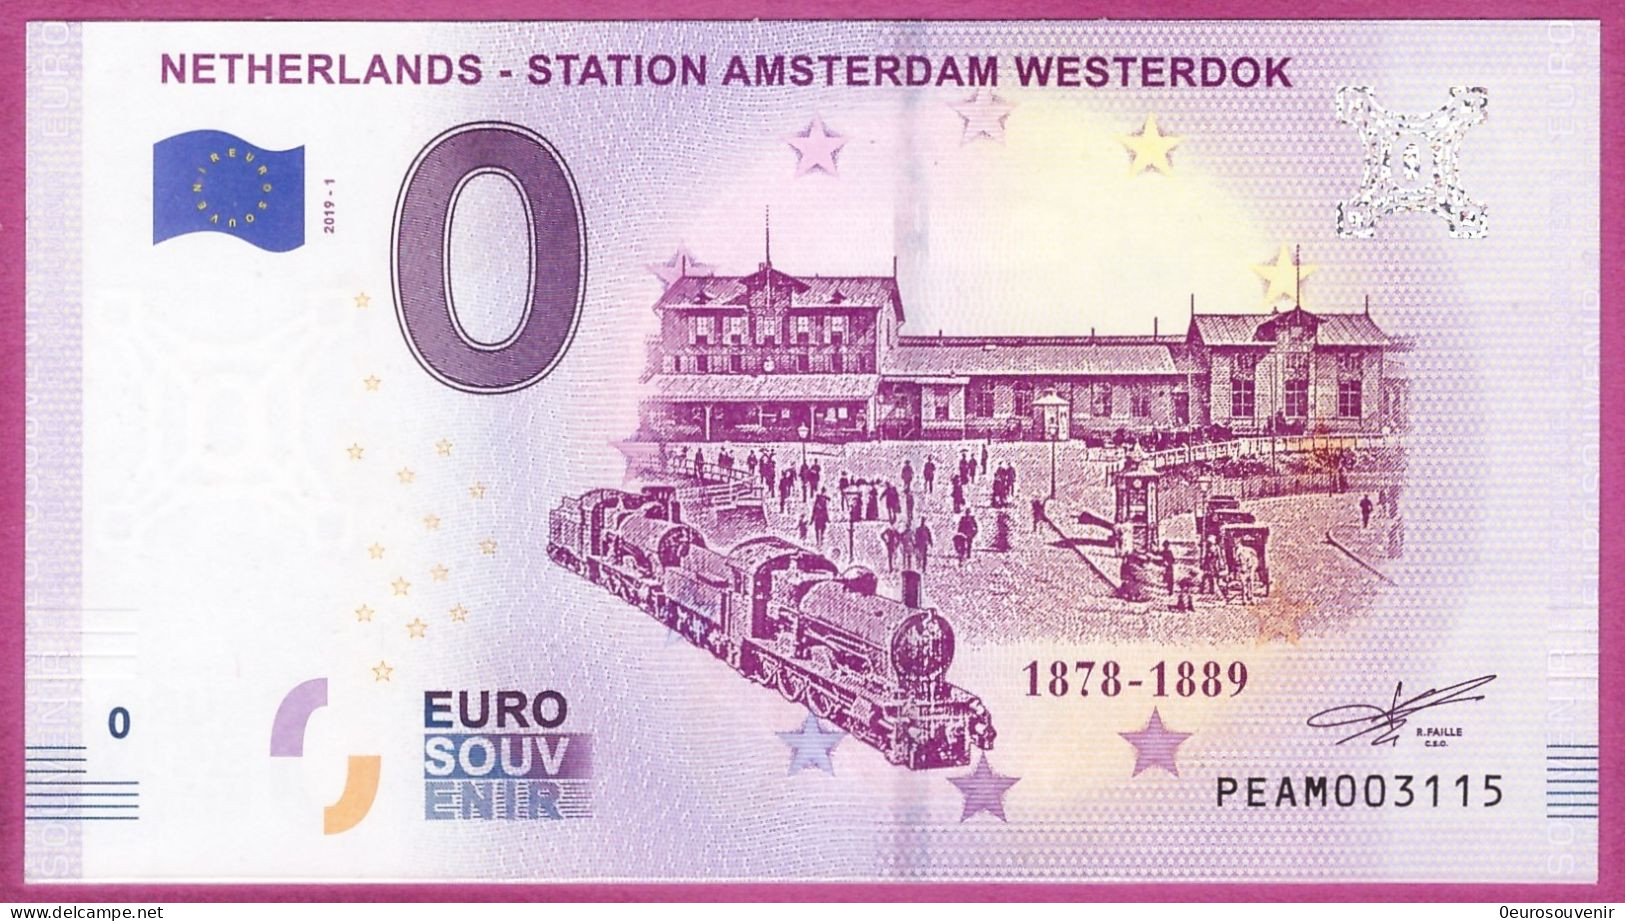 0-Euro PEAM 2019-1 NETHERLANDS - STATION AMSTERDAM WESTERDOK - Private Proofs / Unofficial